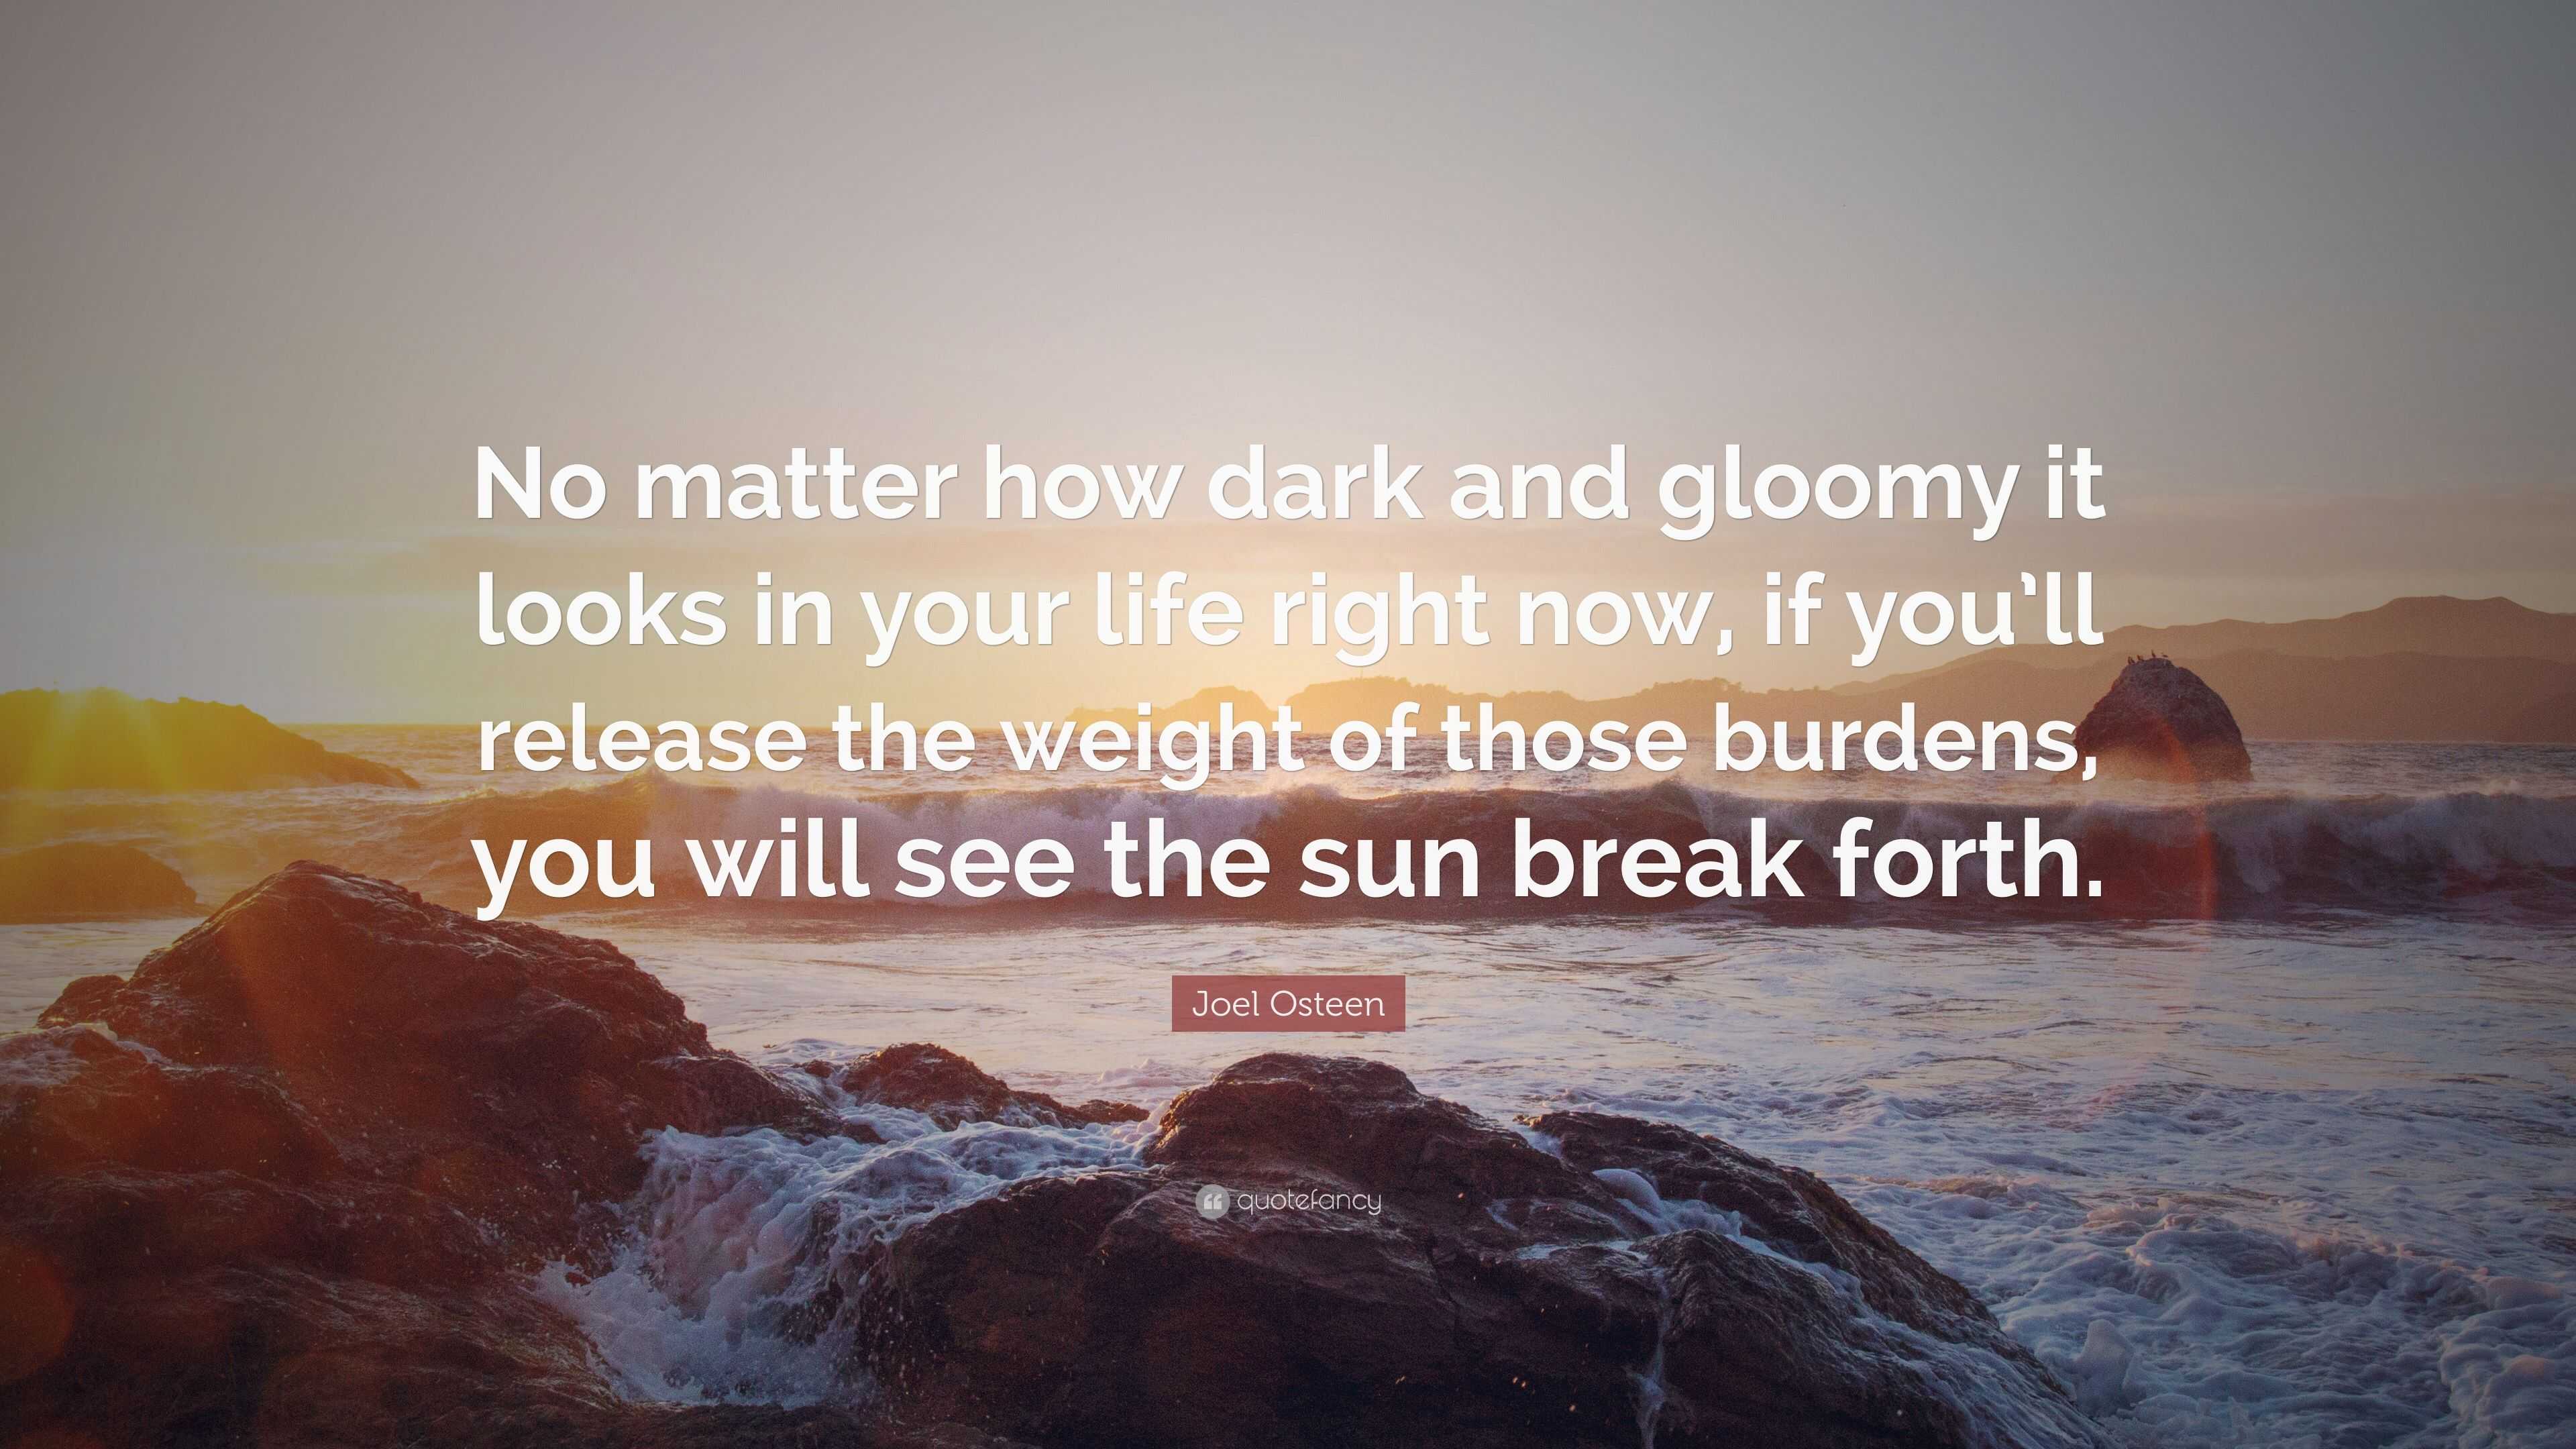 Joel Osteen Quote: “No matter how dark and gloomy it looks in your life ...